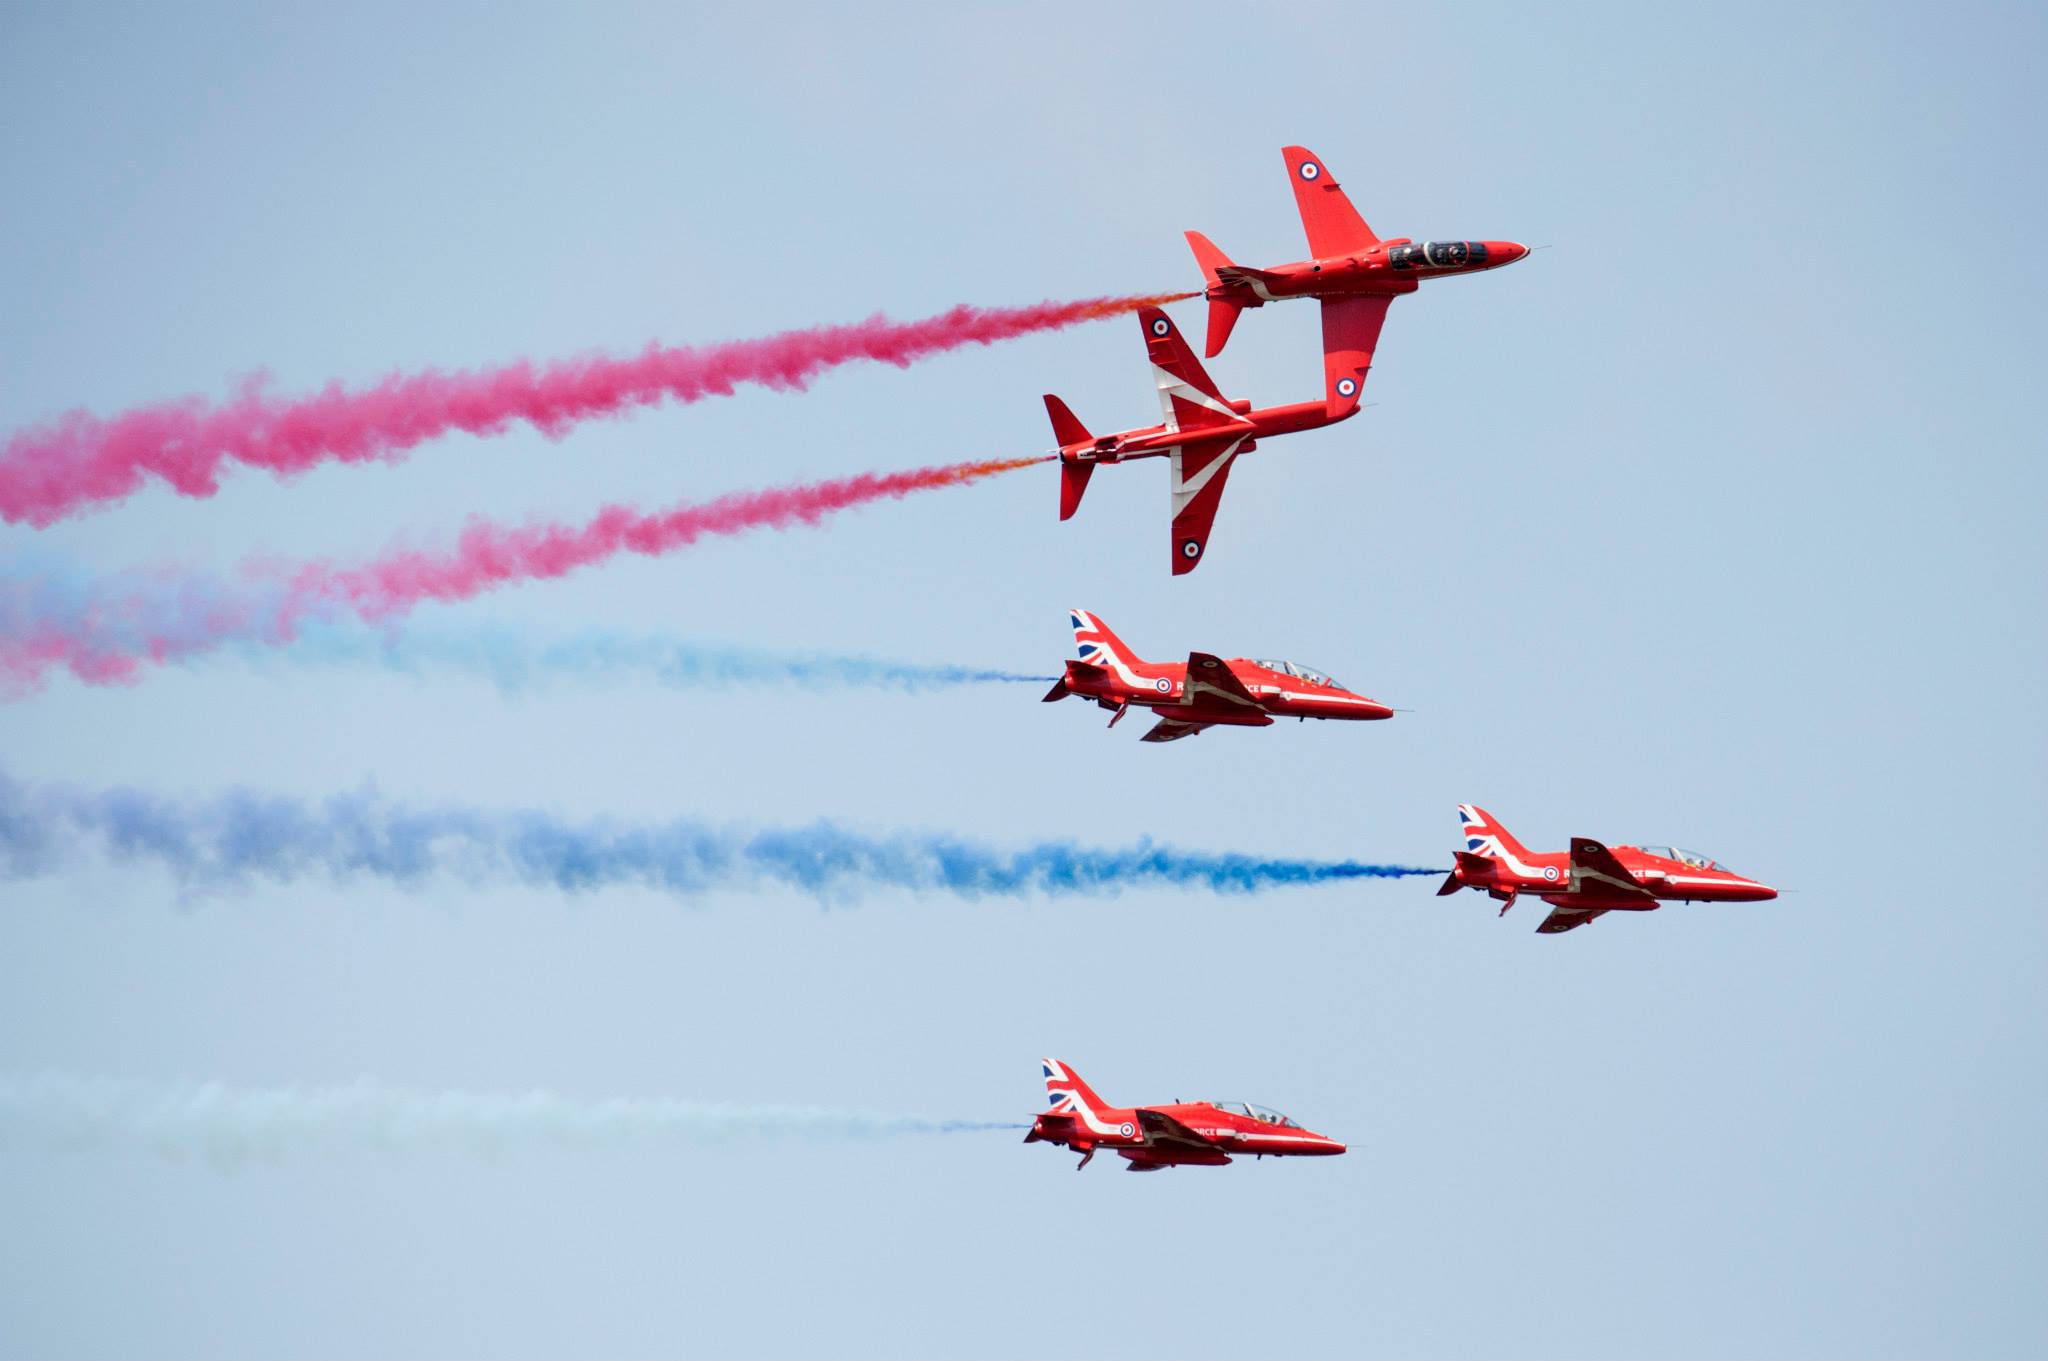 Red Arrow display at the Scampton Airshow 2018